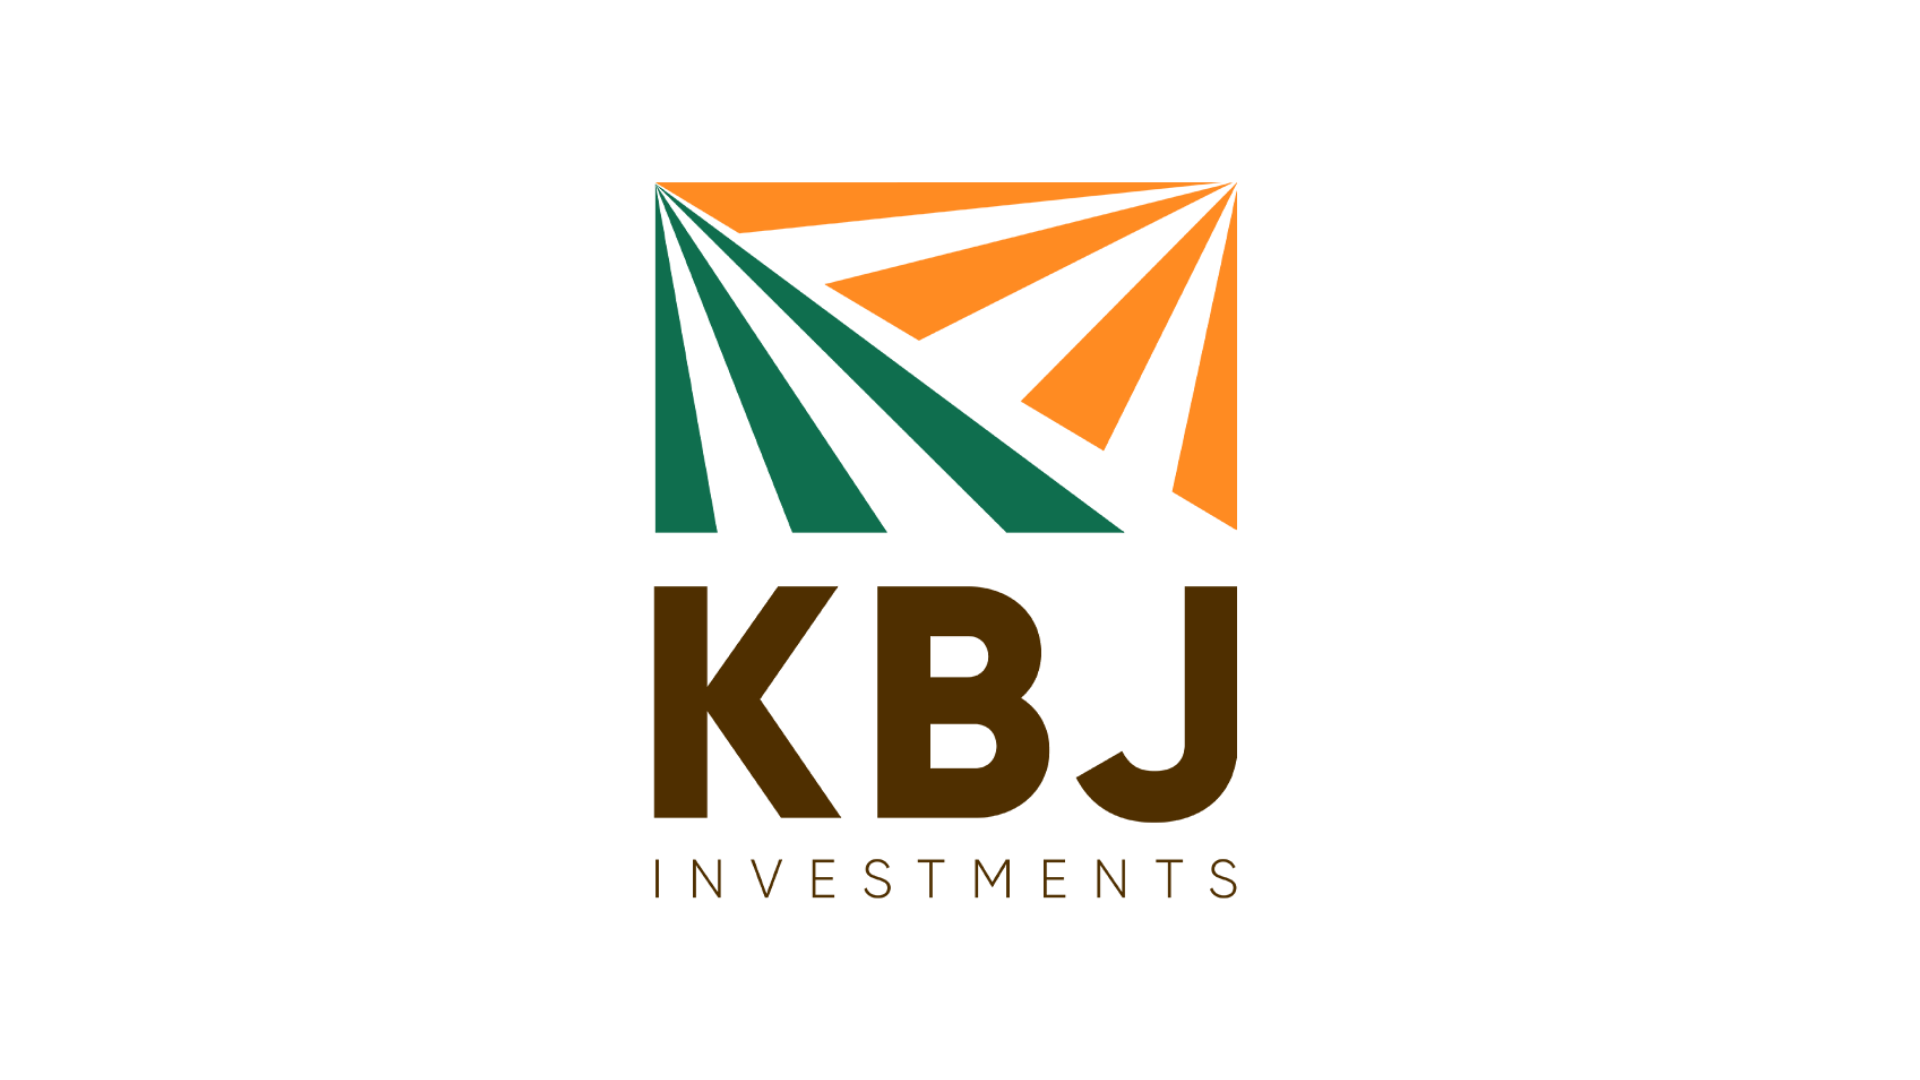 Start-ups, properties, and trading- KBJ Group branches out with a new investment company